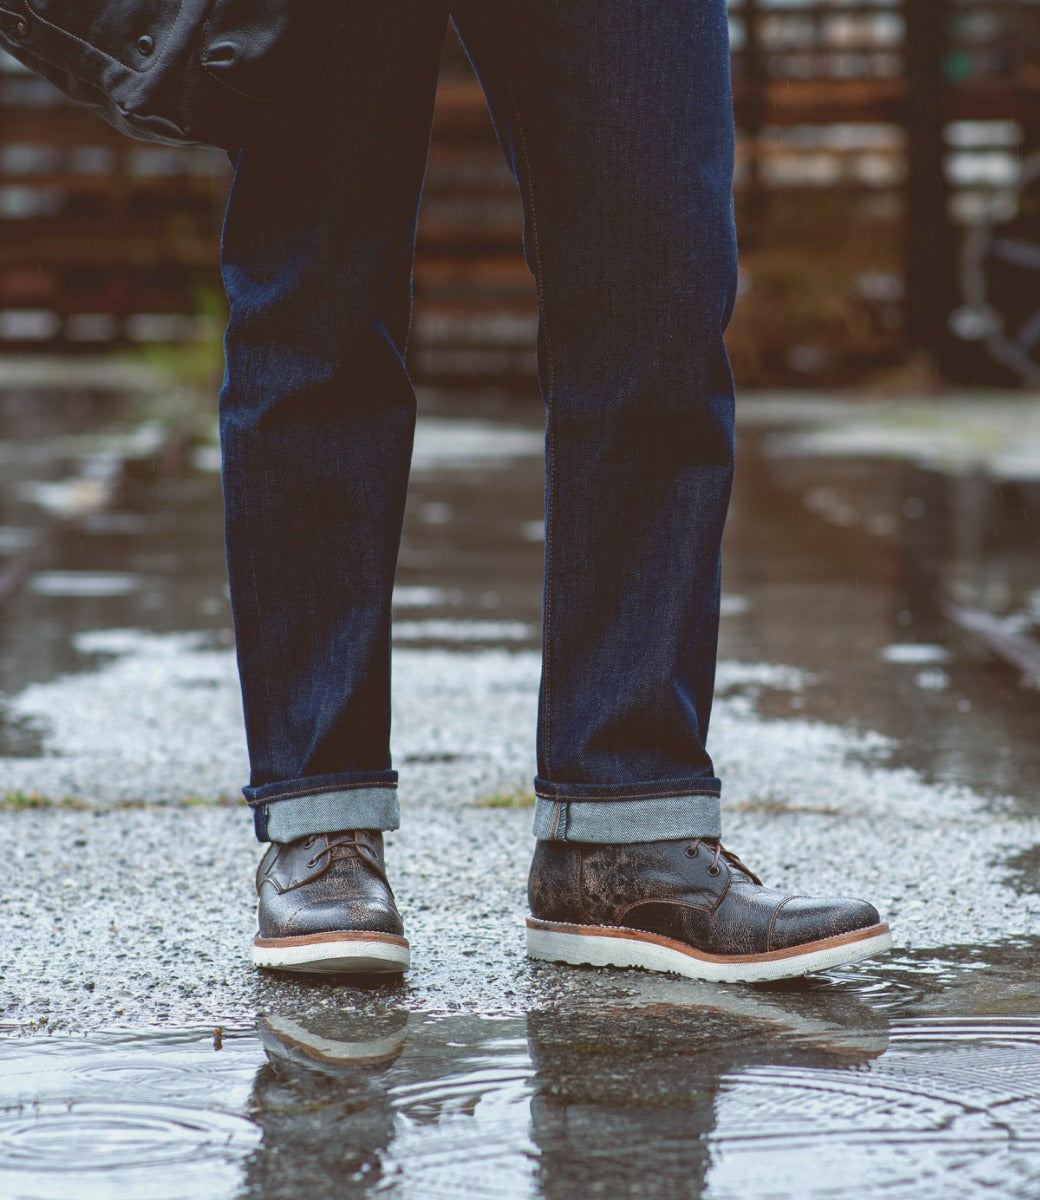 A person wearing dark jeans and Bed Stu Protege Light men's boots with cushioned leather insoles, standing in a puddle on a rainy day.